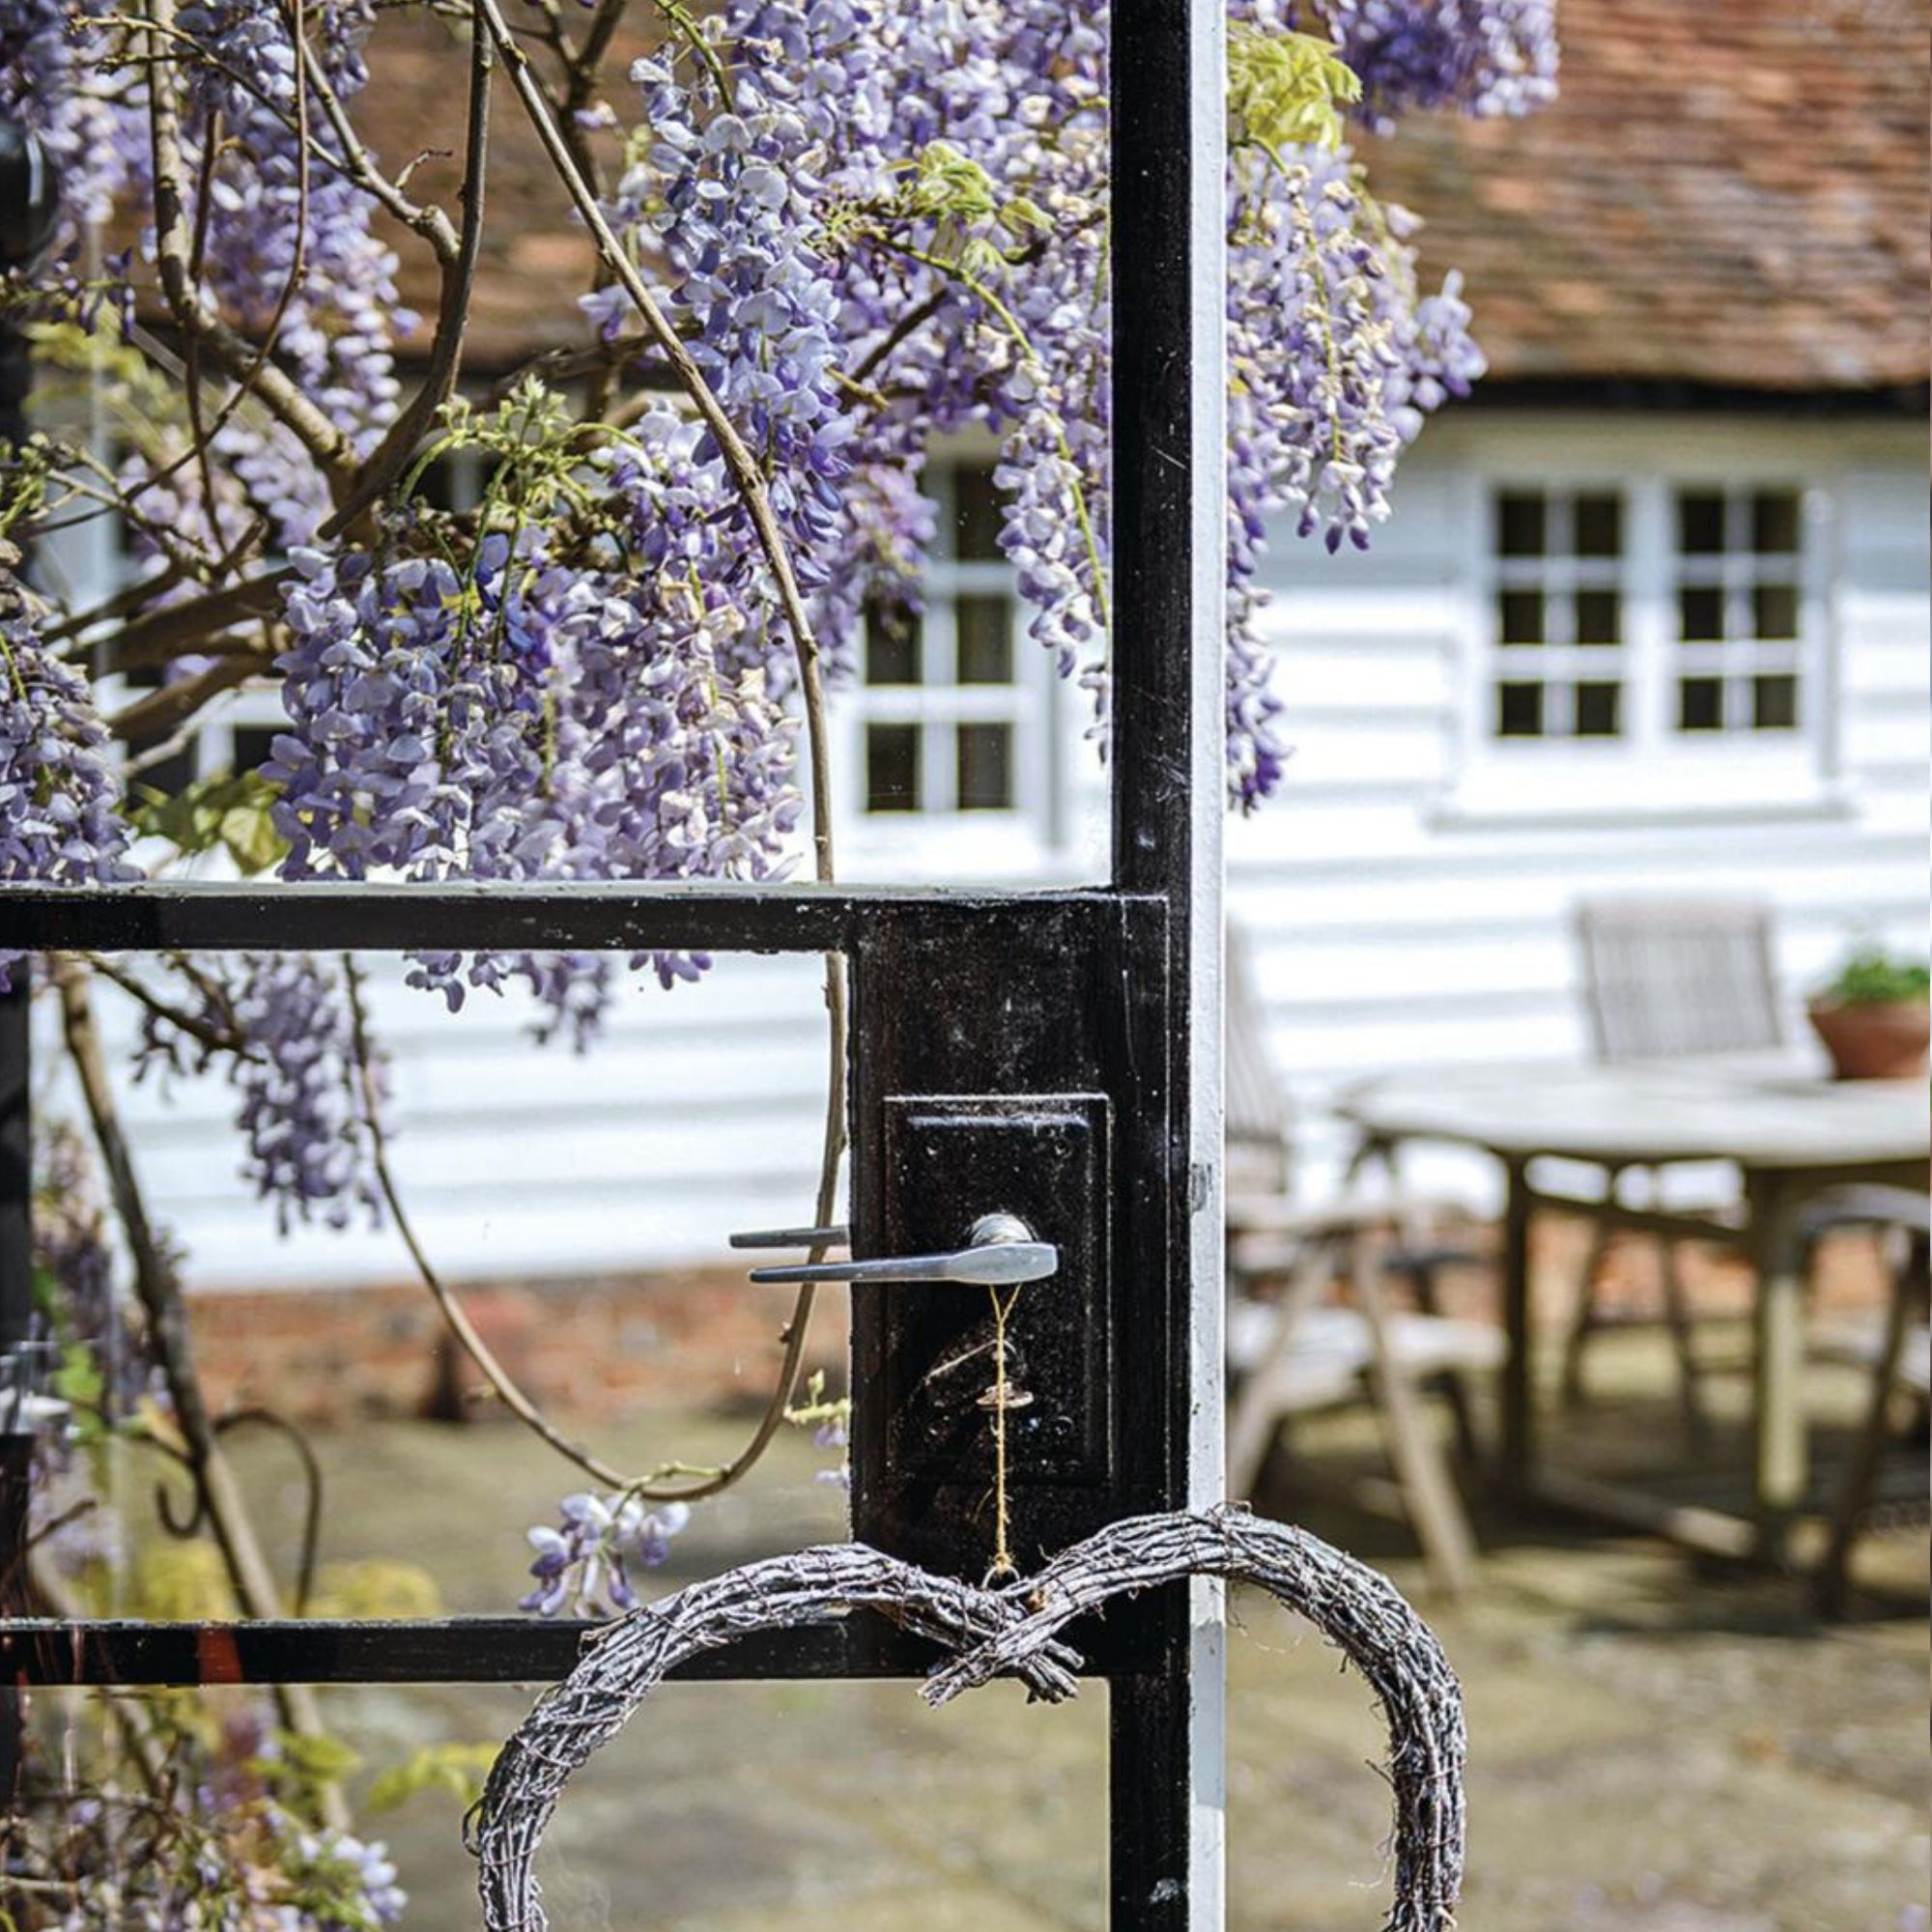 A Wisteria growing up and around an iron gate